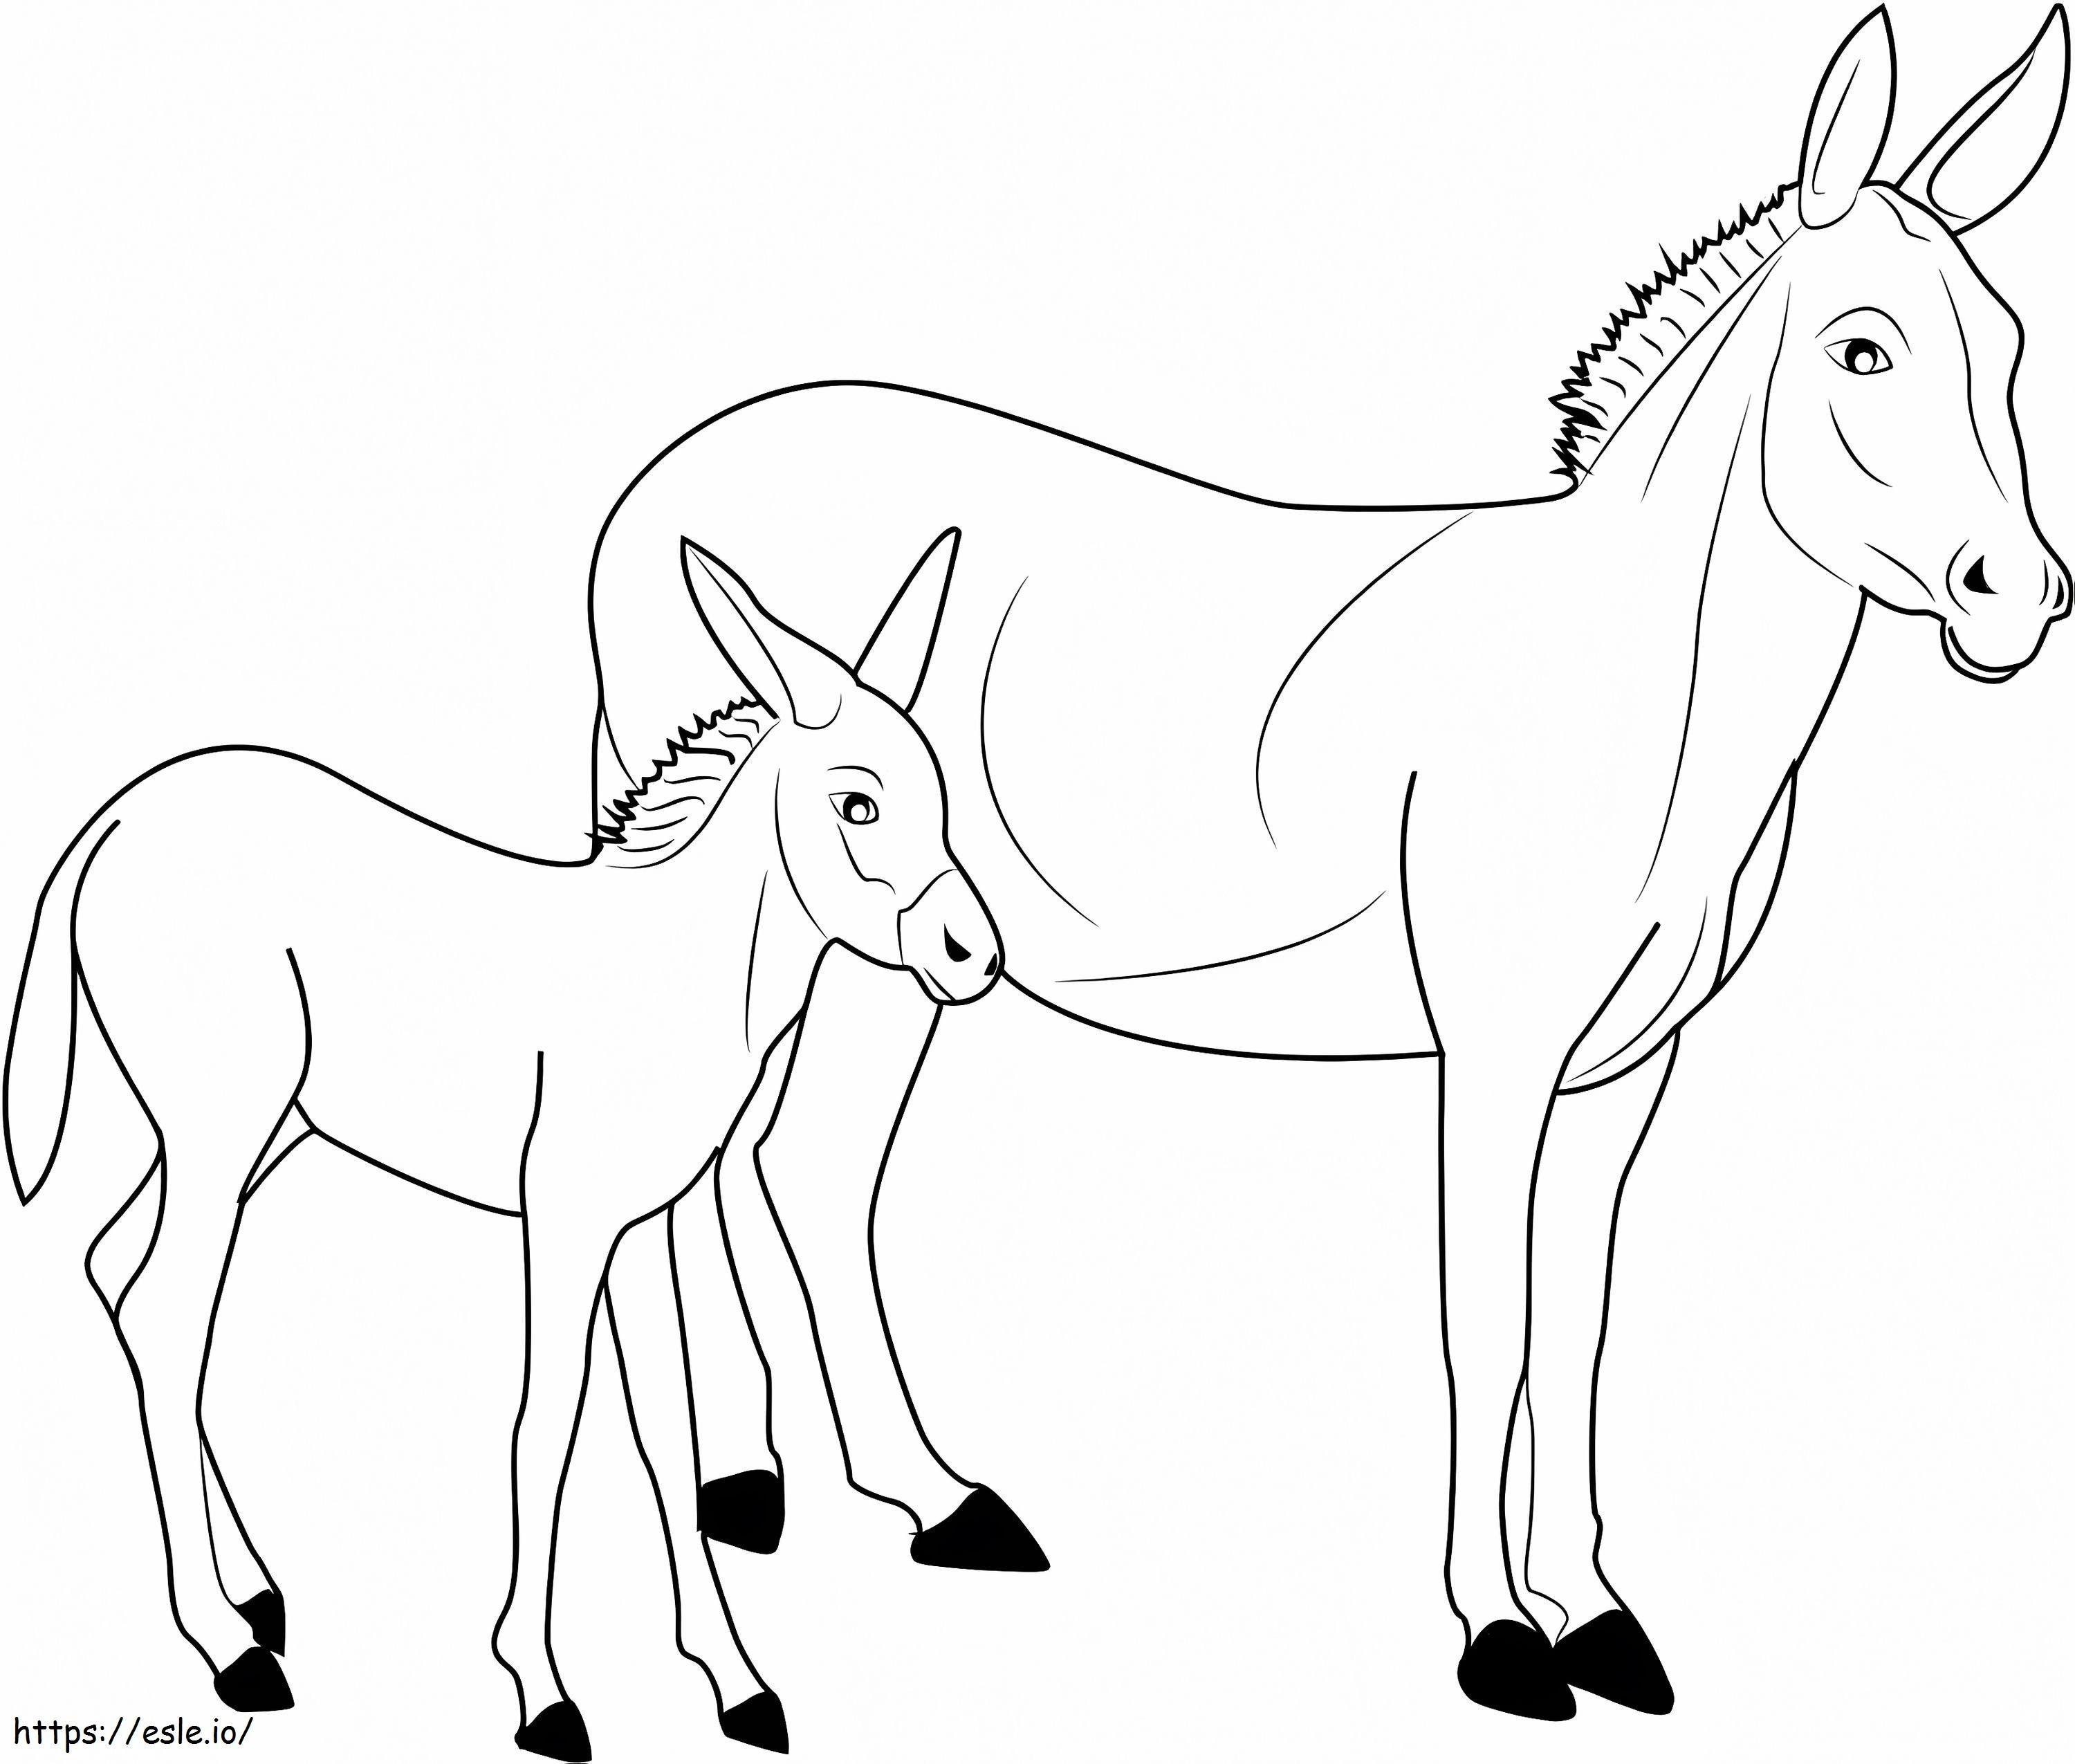 Father Donkey And Baby Donkey coloring page